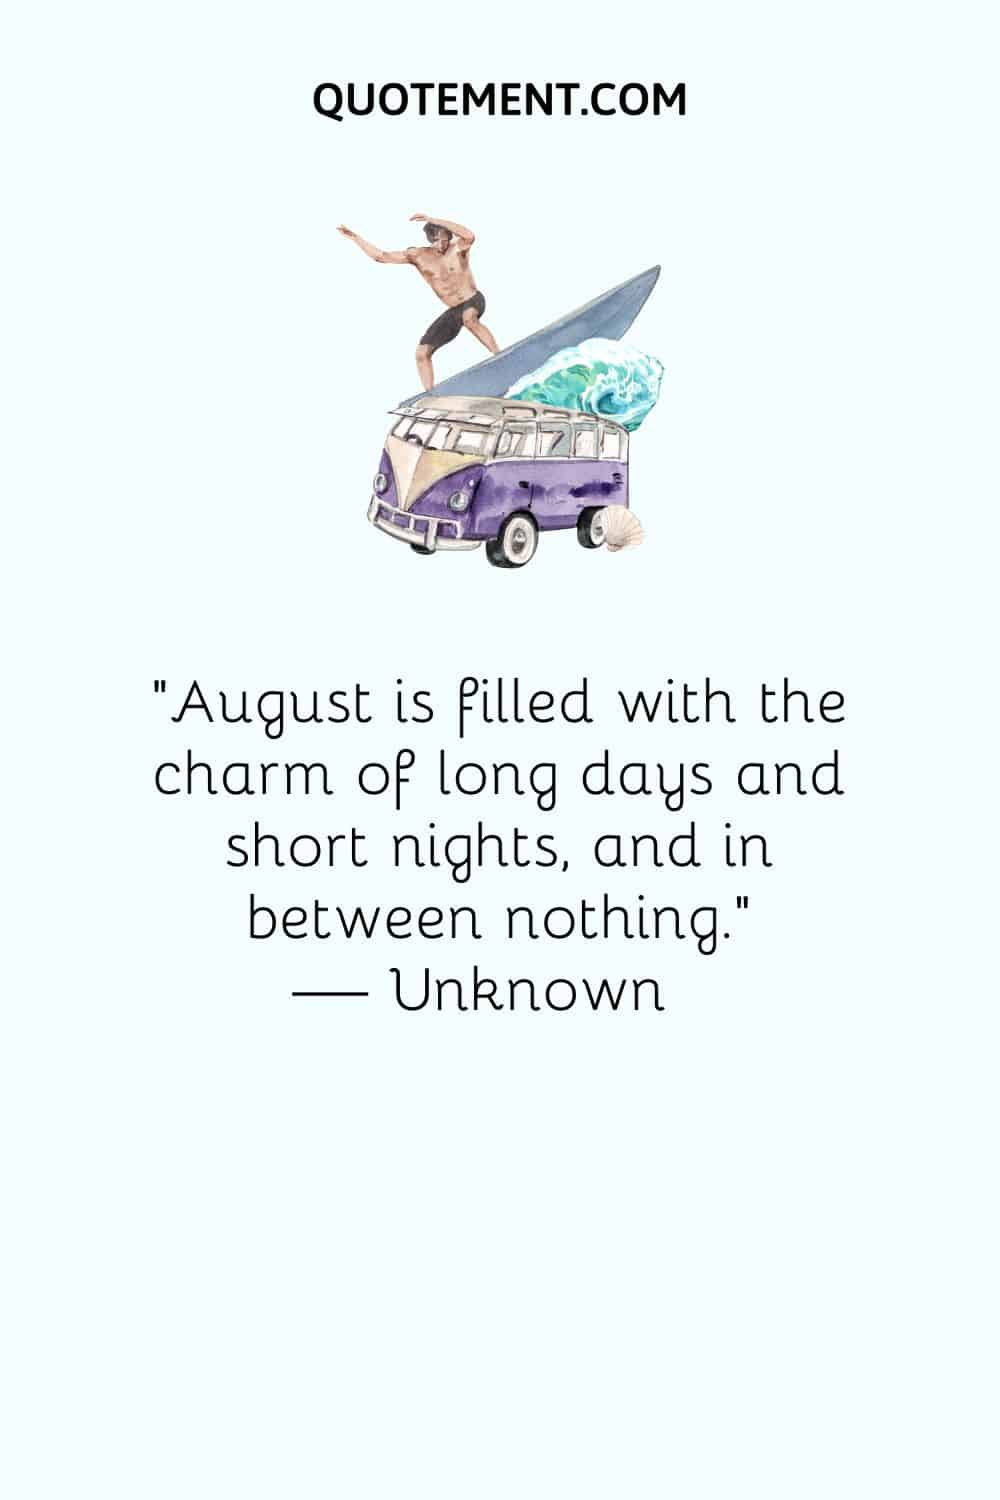 August is filled with the charm of long days and short nights, and in between nothing